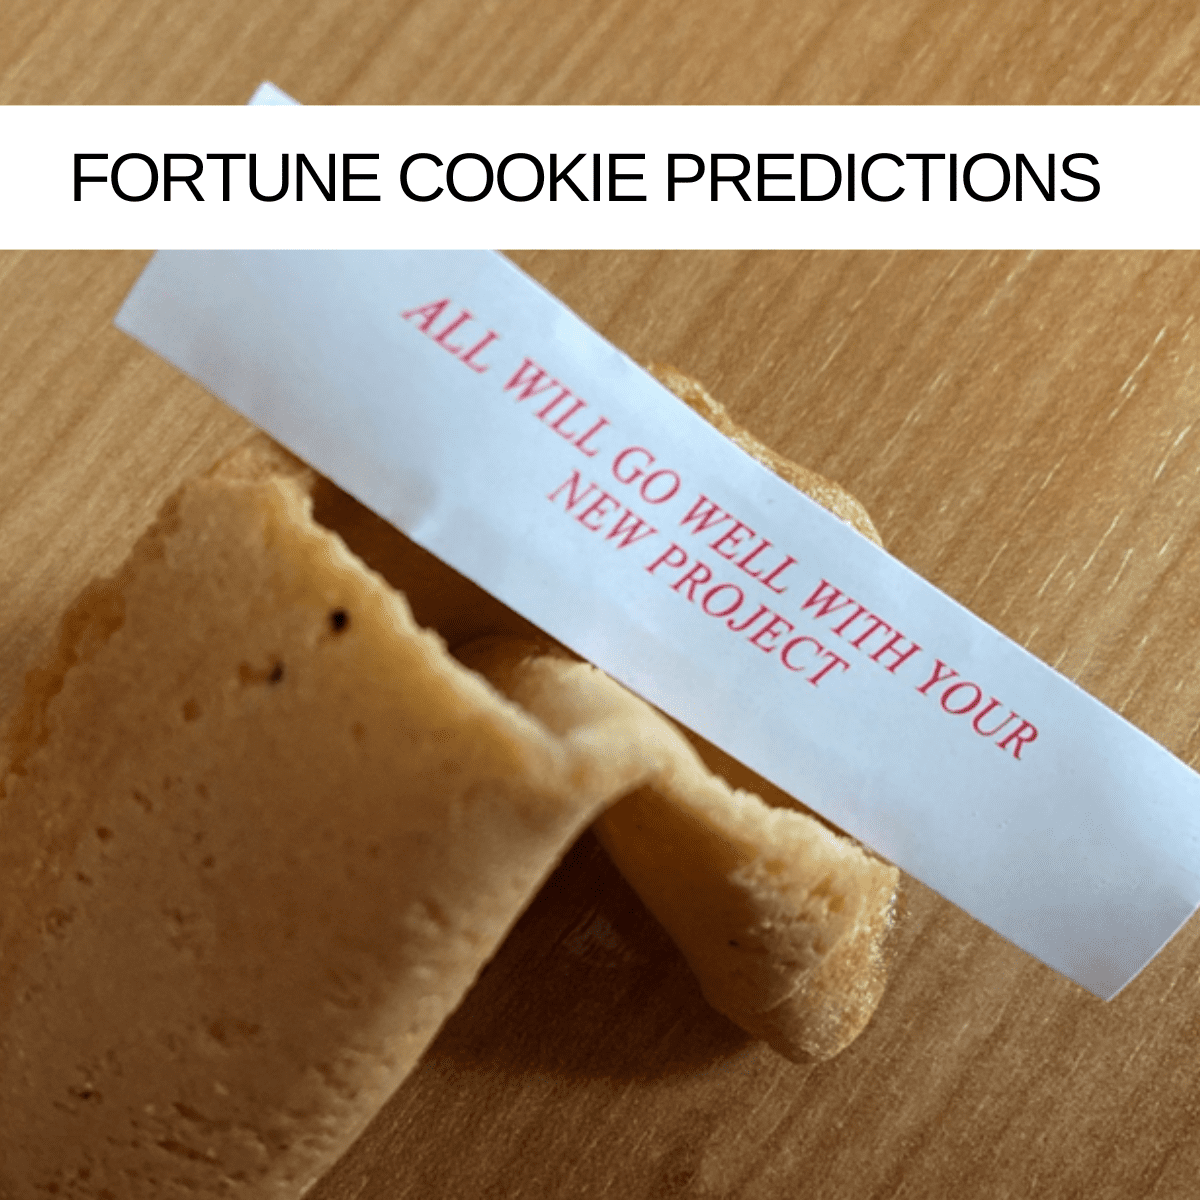 A fortune cookie with a fortune inside it